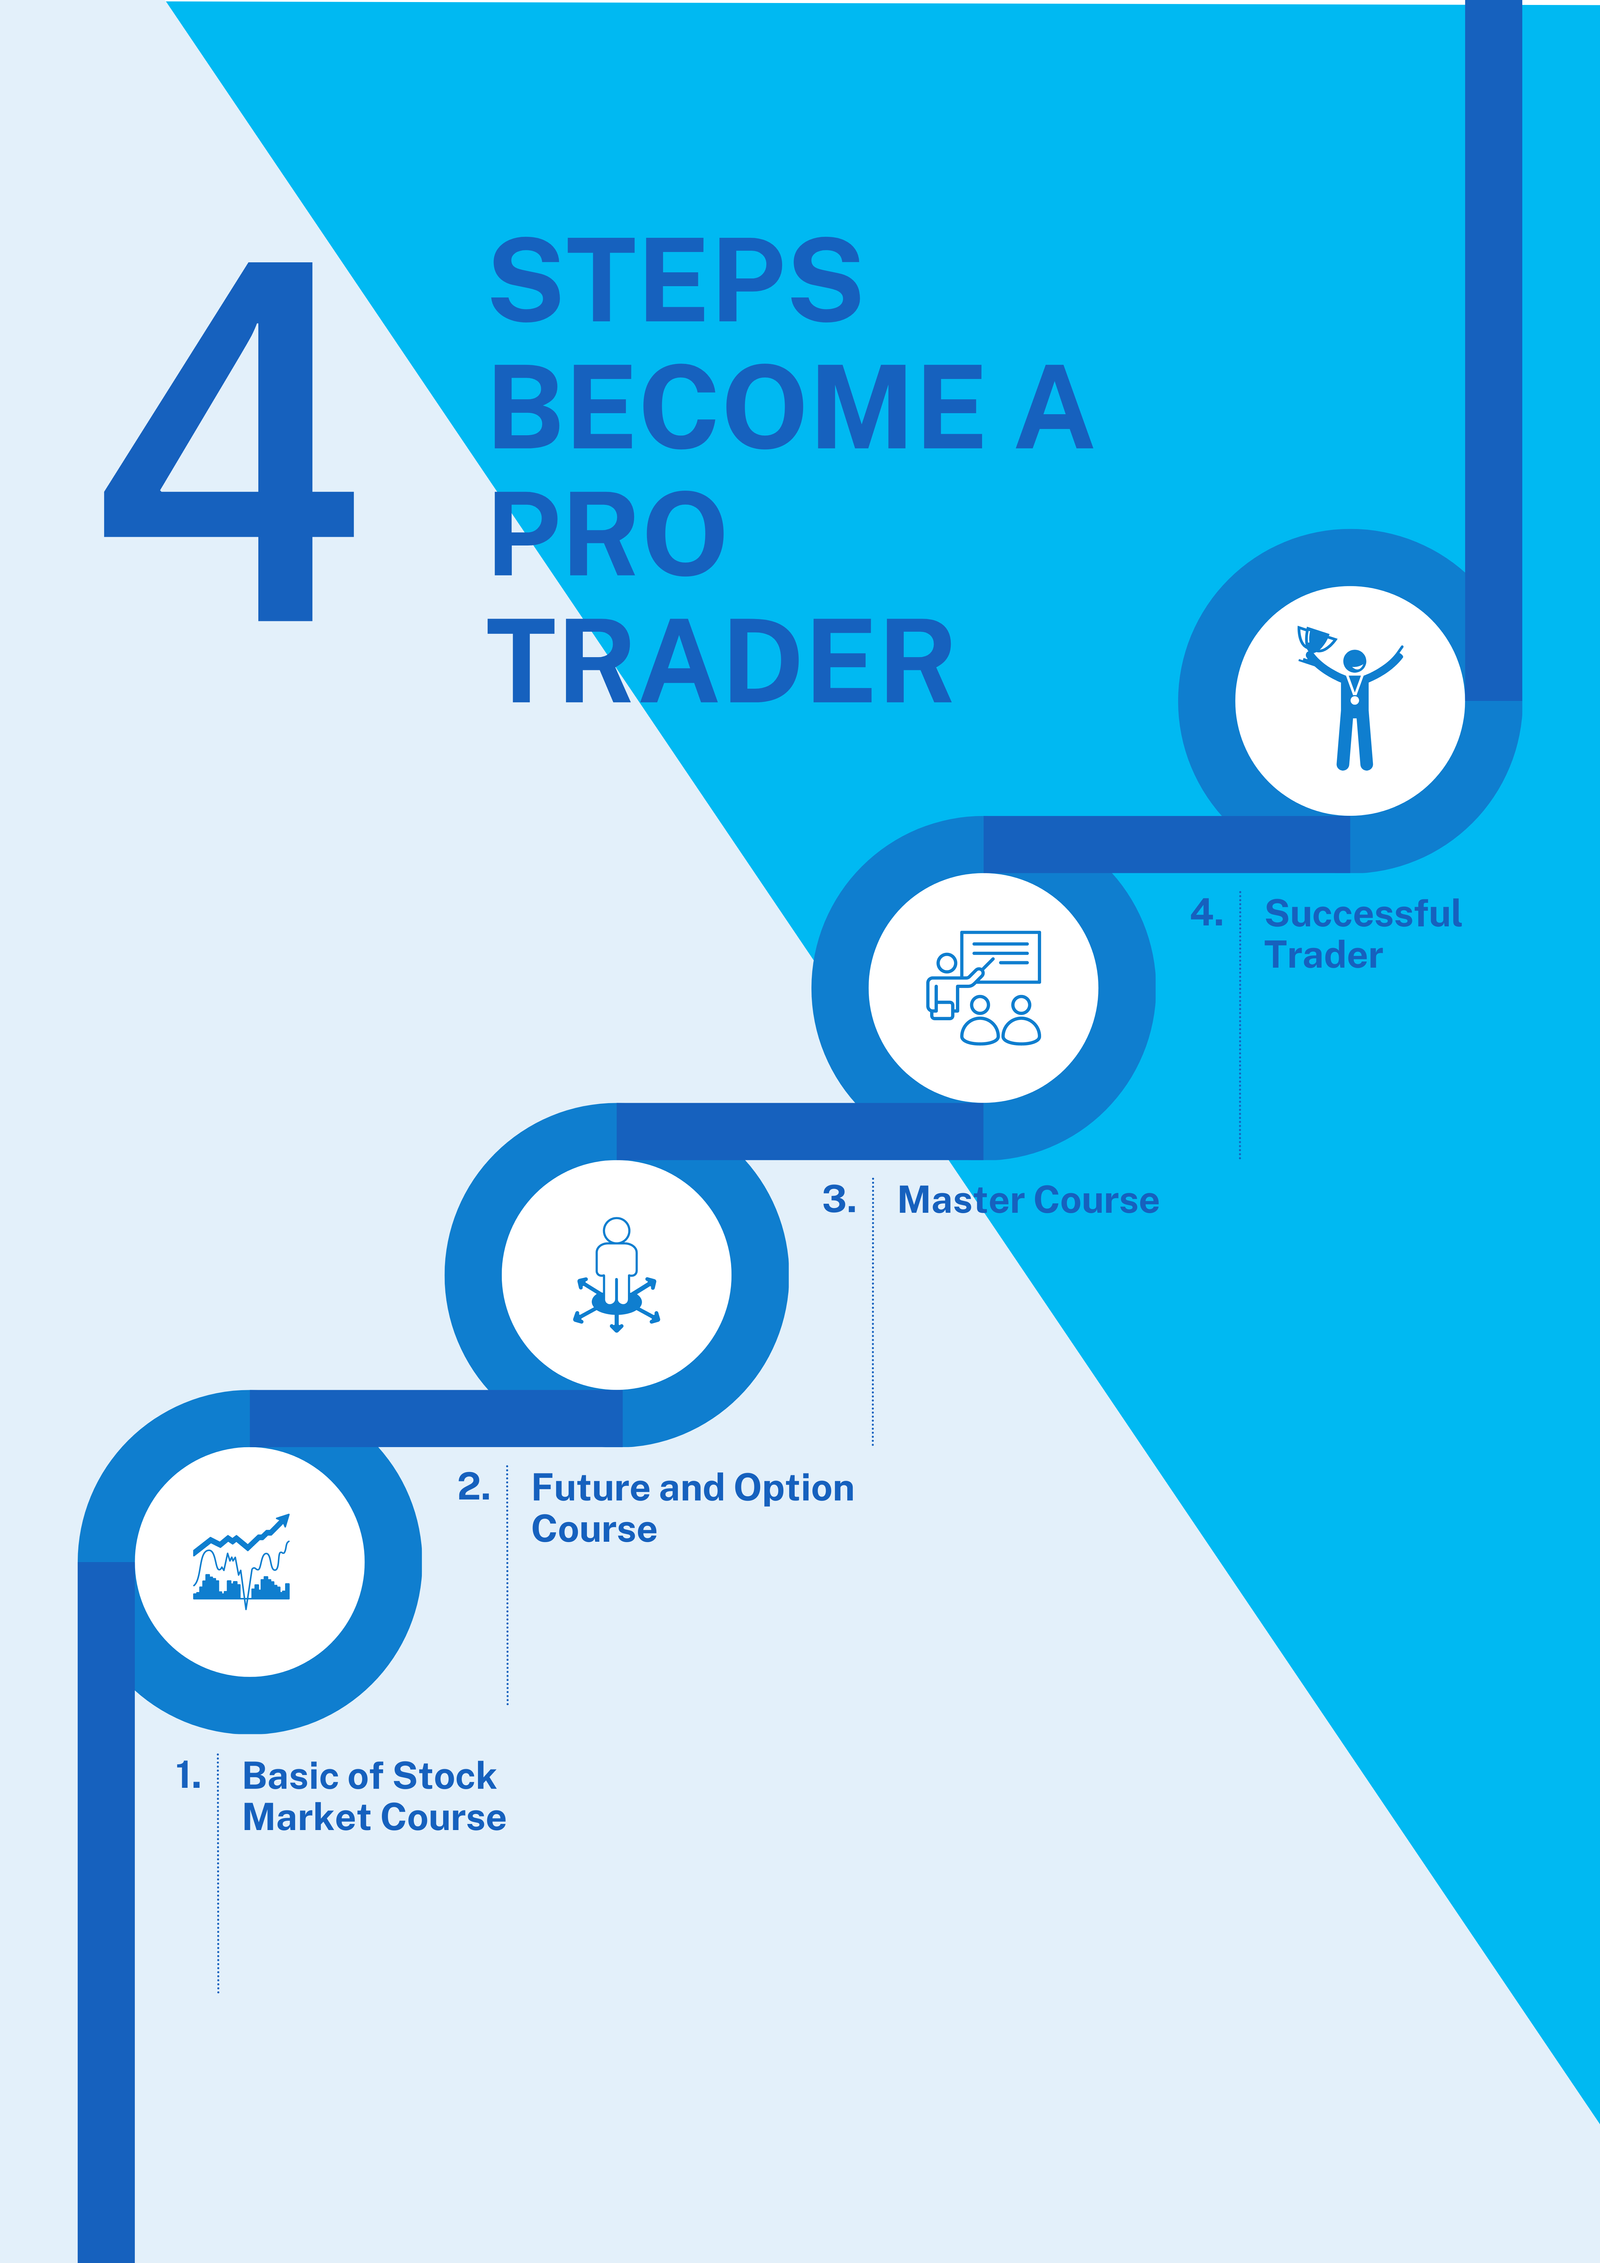 Steps to become a pro trader